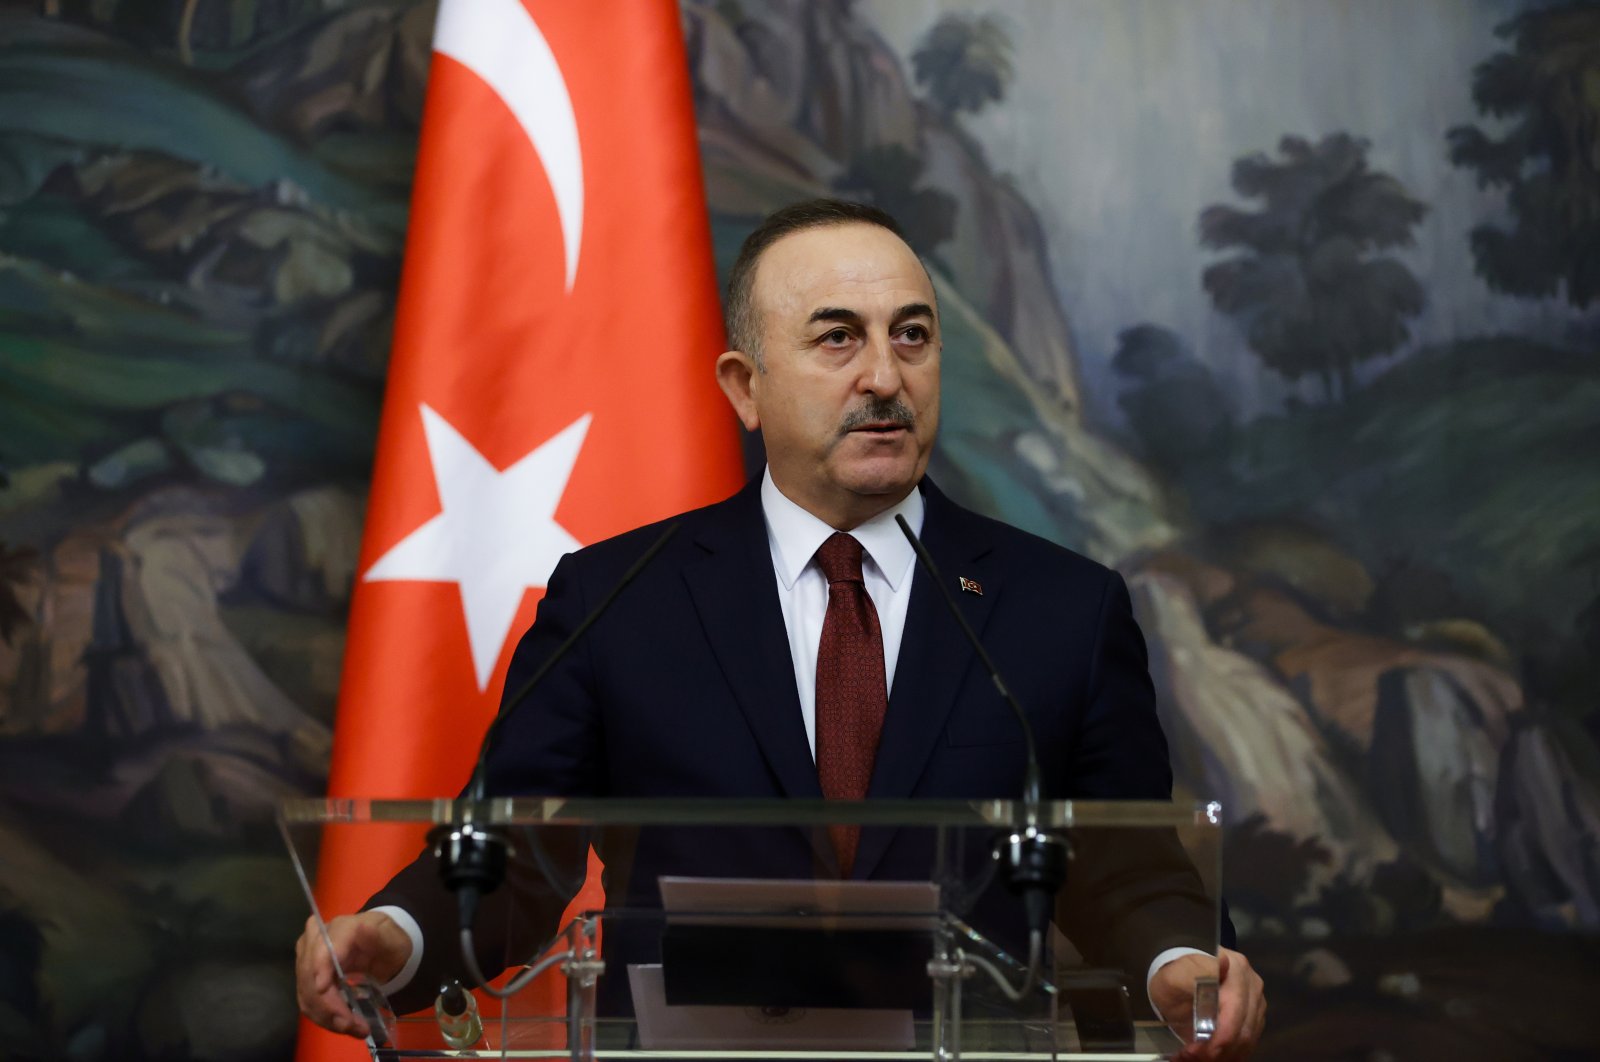 Foreign Minister Mevlüt Çavuşoğlu speaking at a joint press conference with his Russian counterpart in Moscow, Russia, March 16, 2022. (AA Photo)